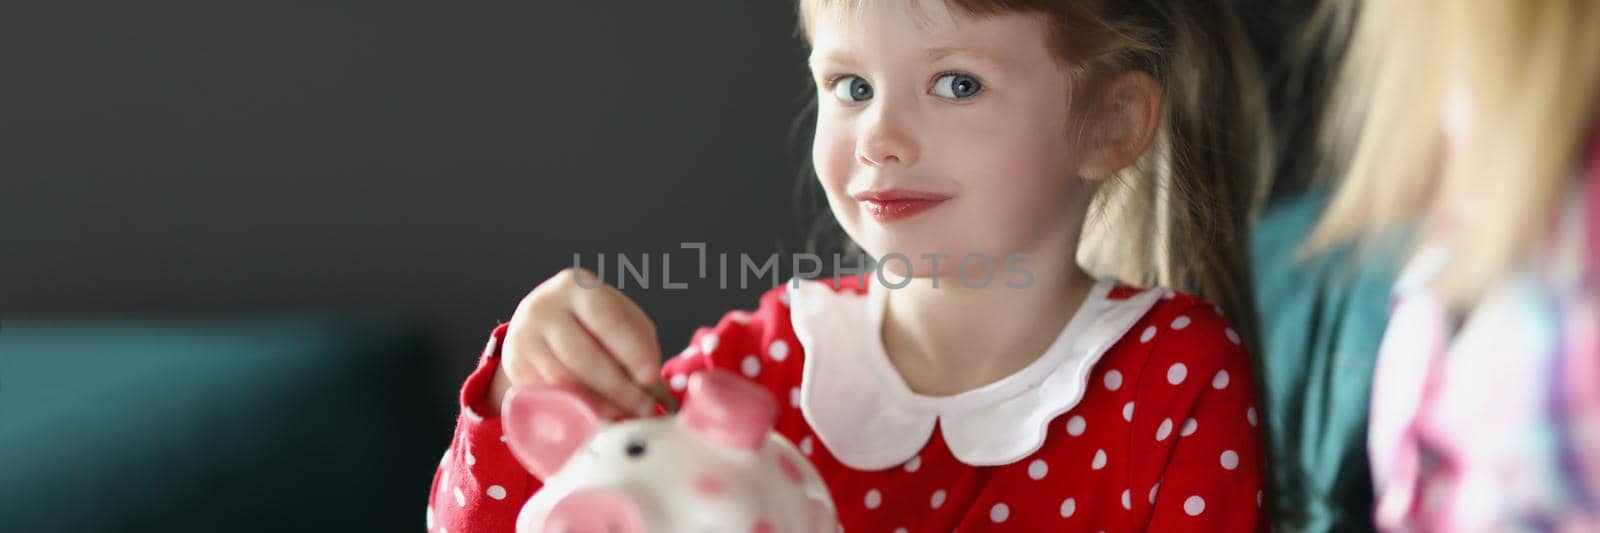 Portrait of cute little child putting coin into piggy bank. Mother teach daughter to save up, save to buy toy or sweets. Childhood, saving up, investment, money, finance concept